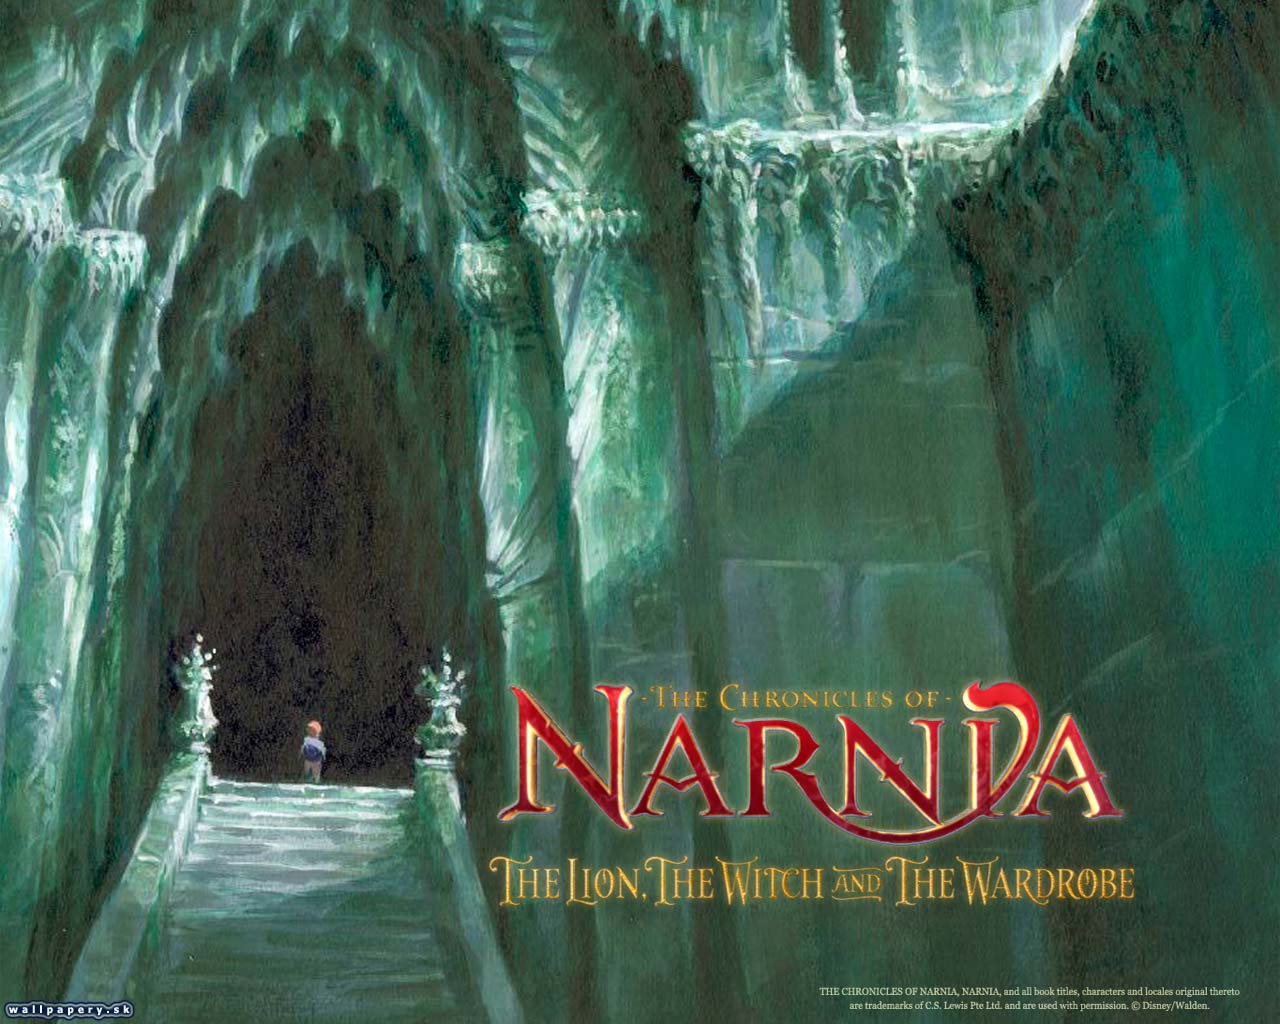 The Chronicles of Narnia: The Lion, The Witch and the Wardrobe - wallpaper 11